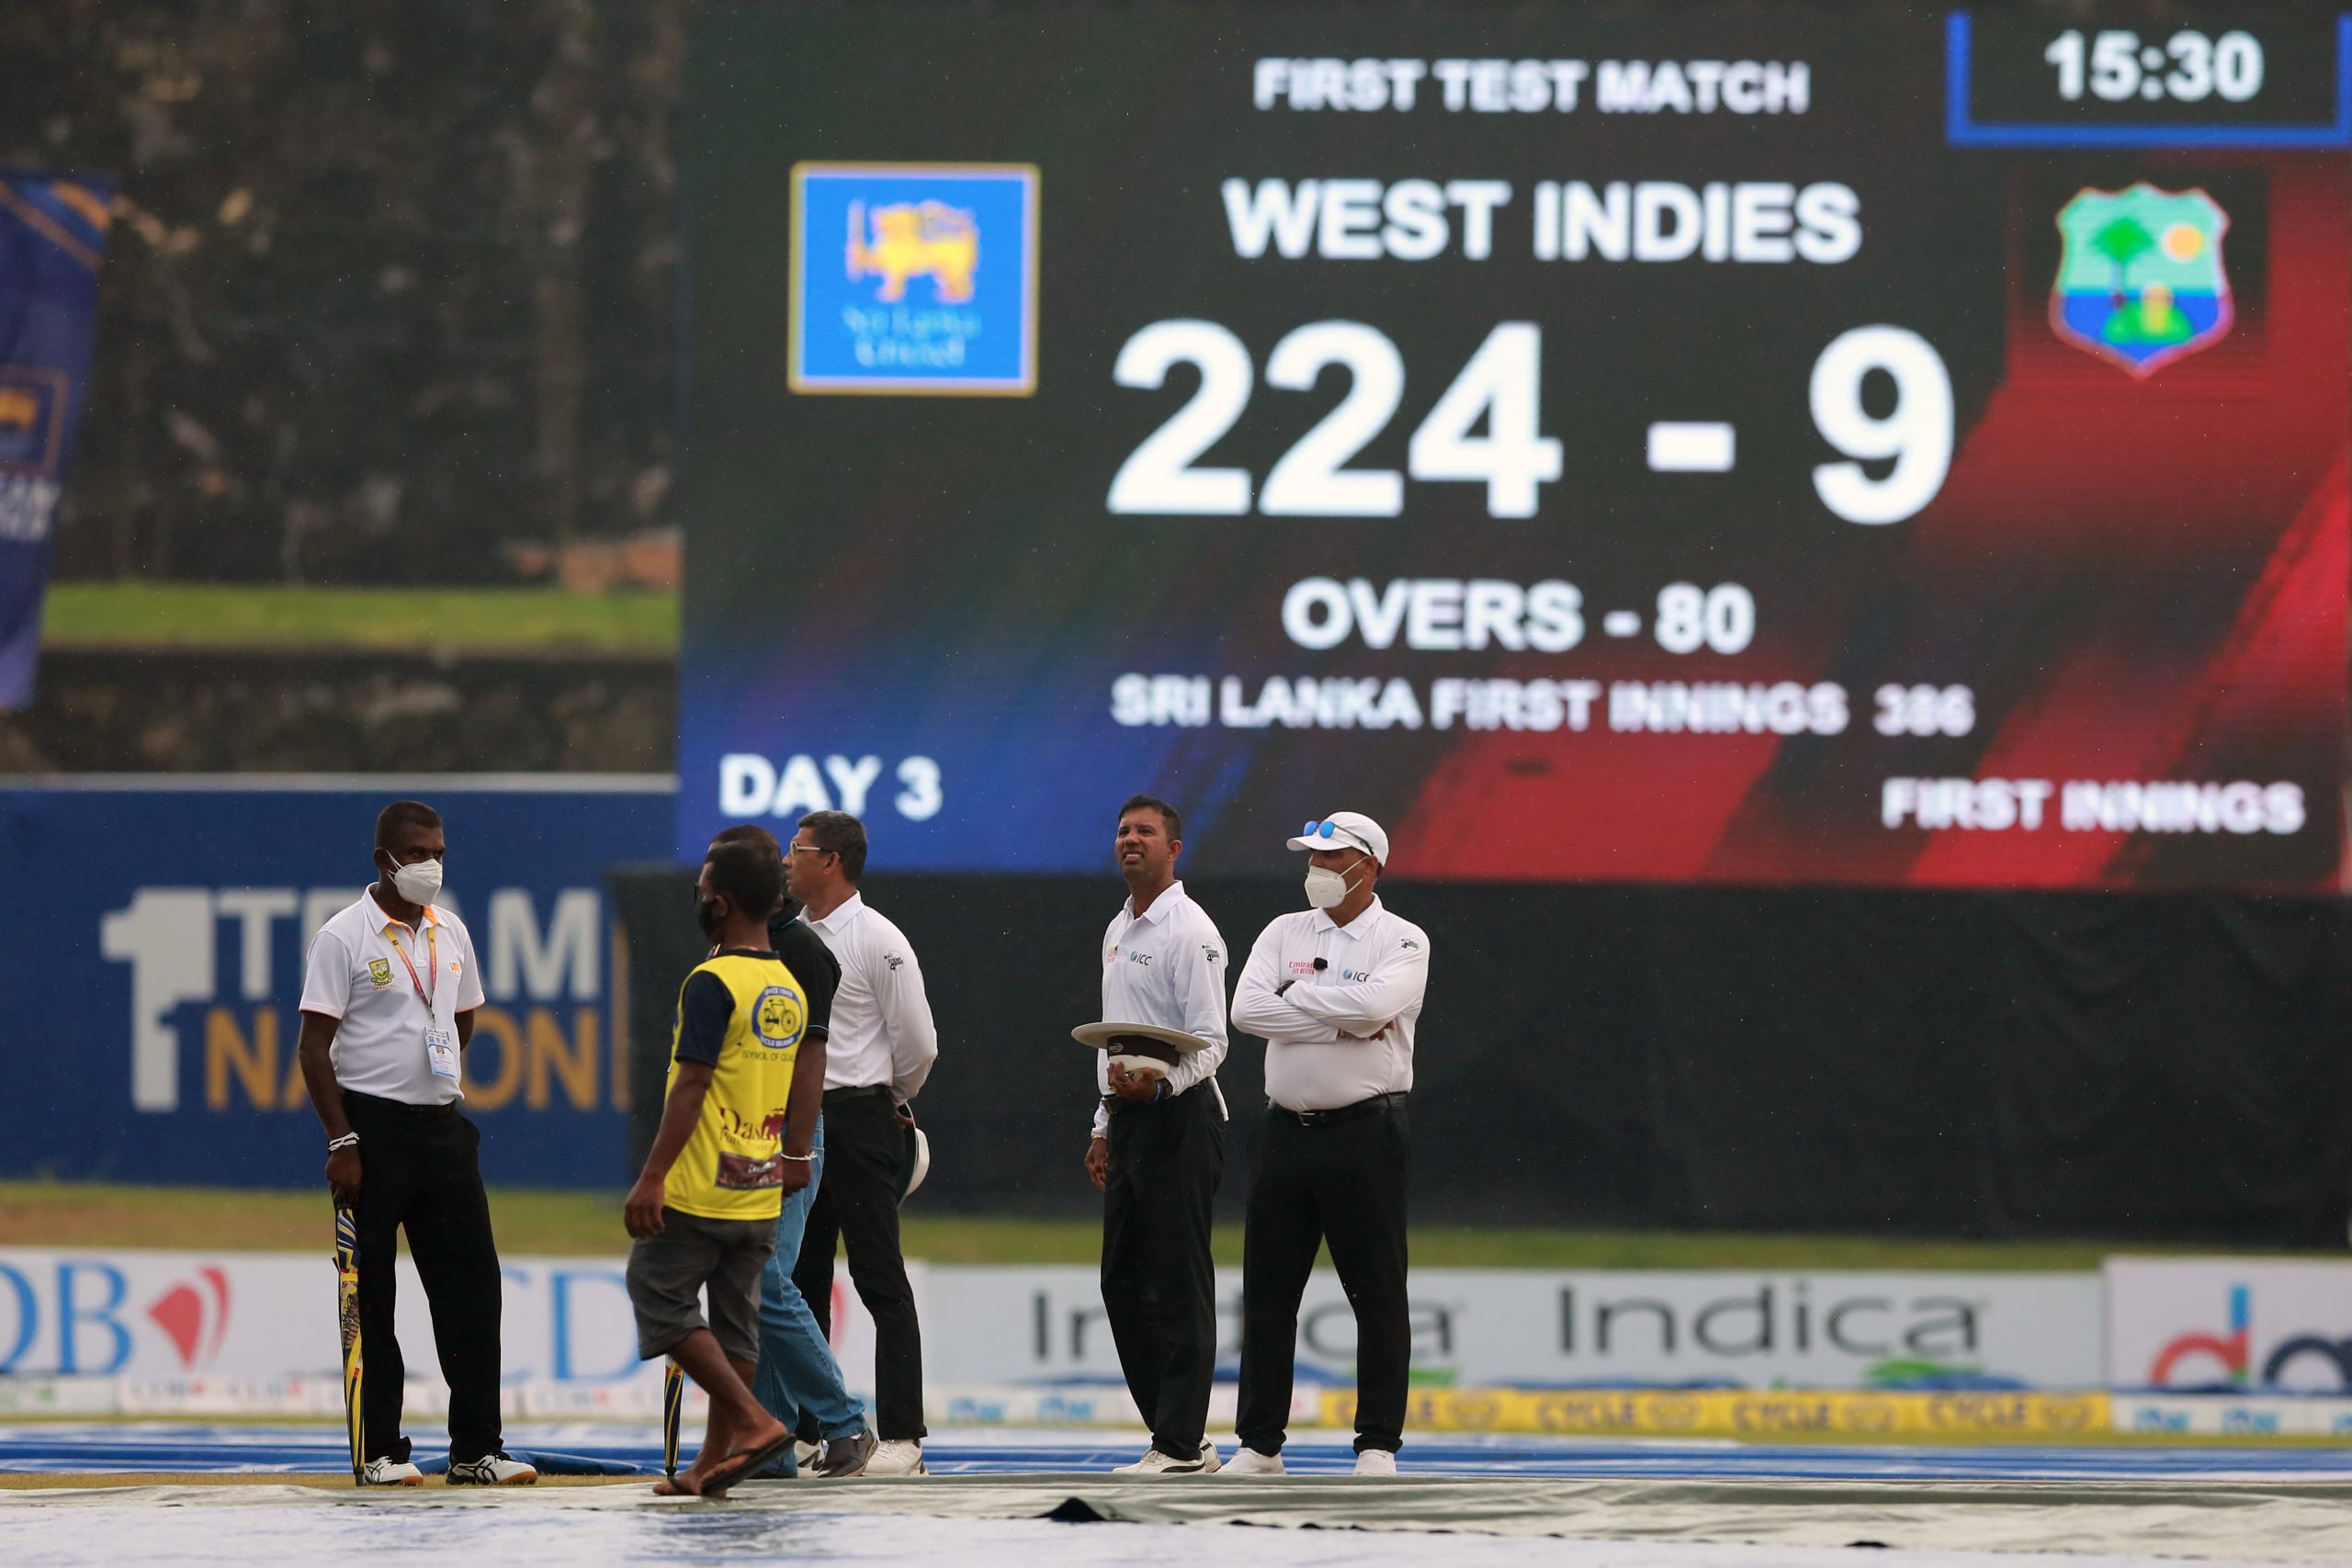 West Indies frustrate Lankan bowlers to recover to 224/9 on rain hit third day